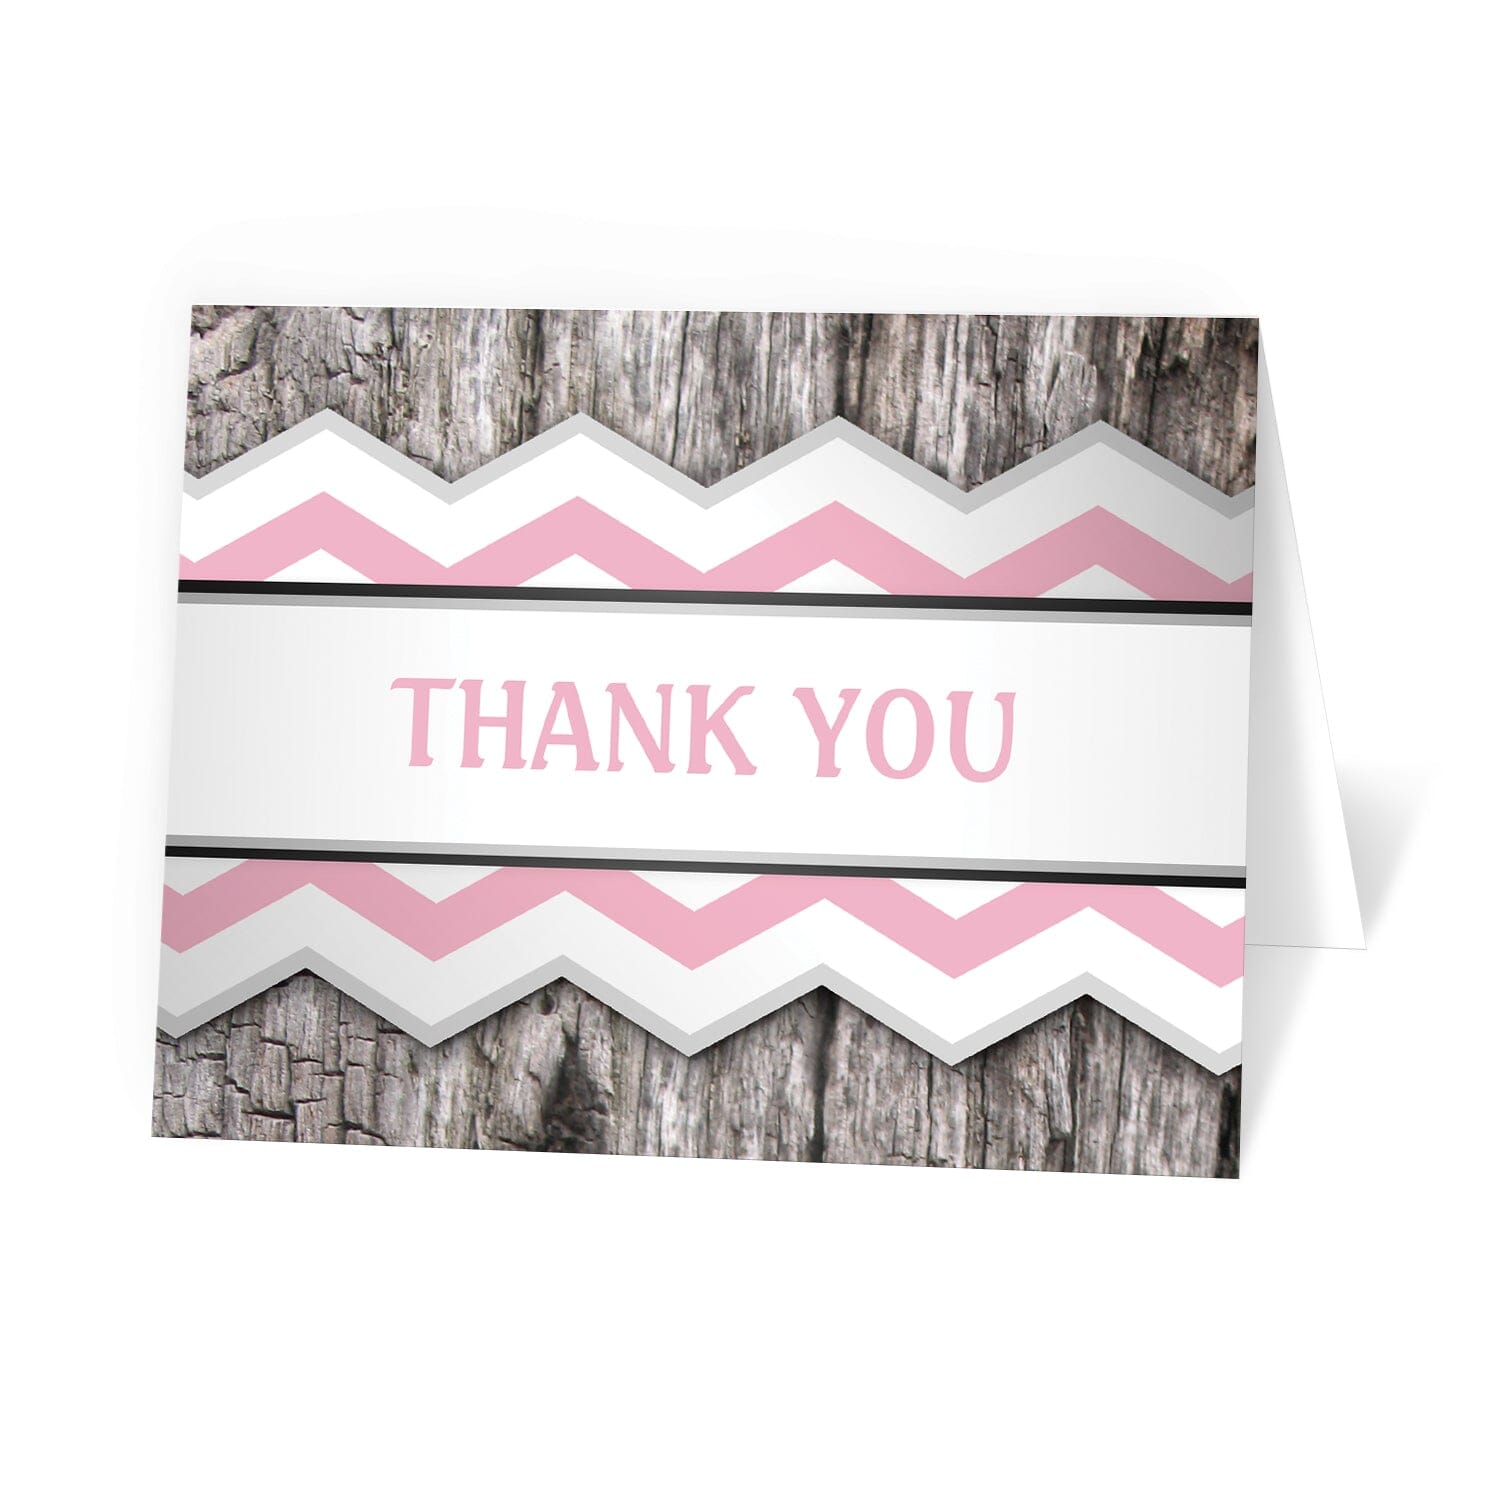 Rustic Pink Chevron and Wood Thank You Cards at Artistically Invited.